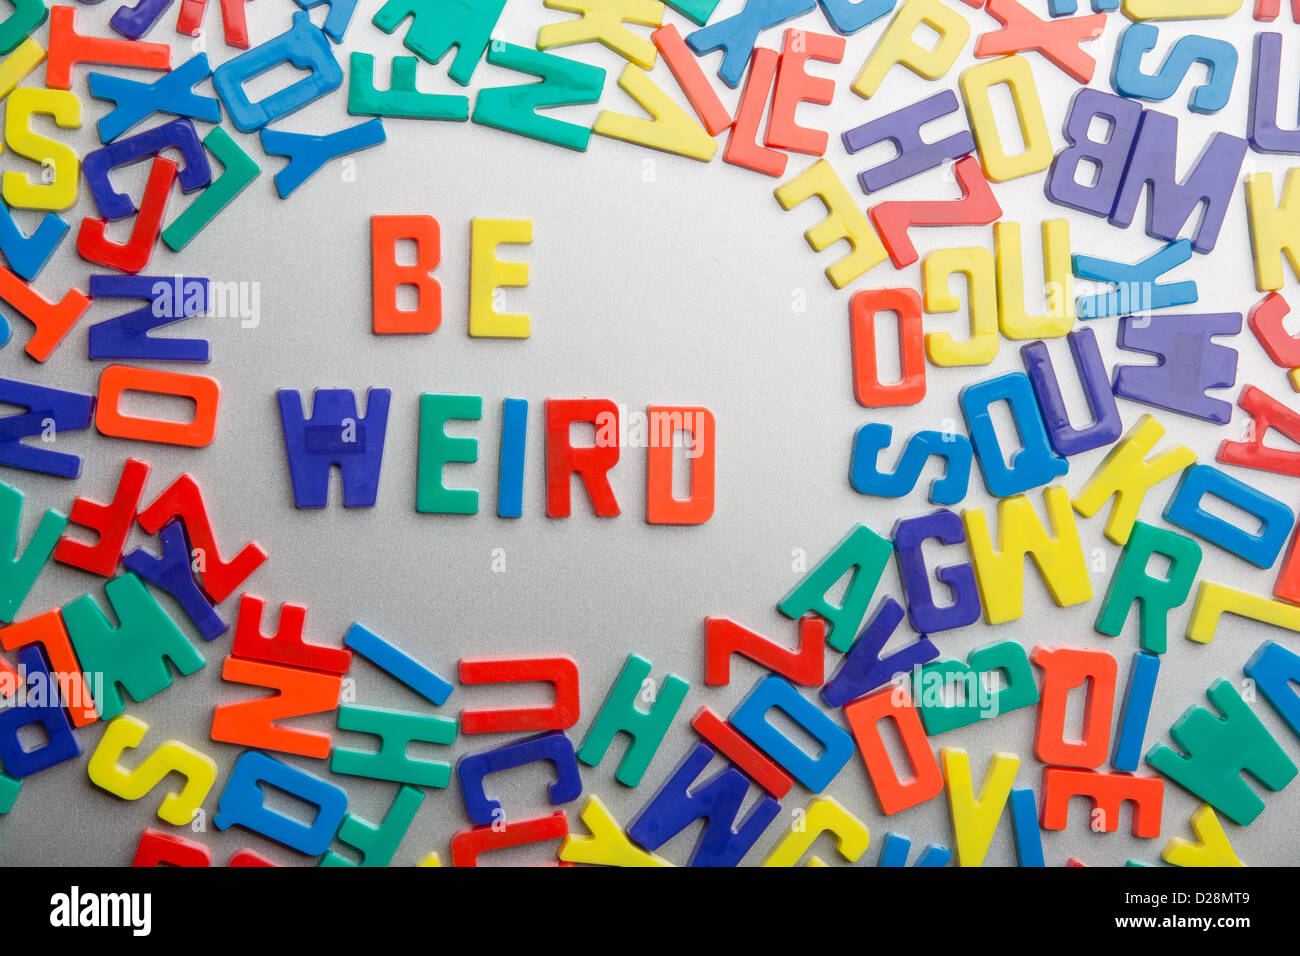 'Be Weird' - Refrigerator magnets spell a message out of a jumble of letters Stock Photo